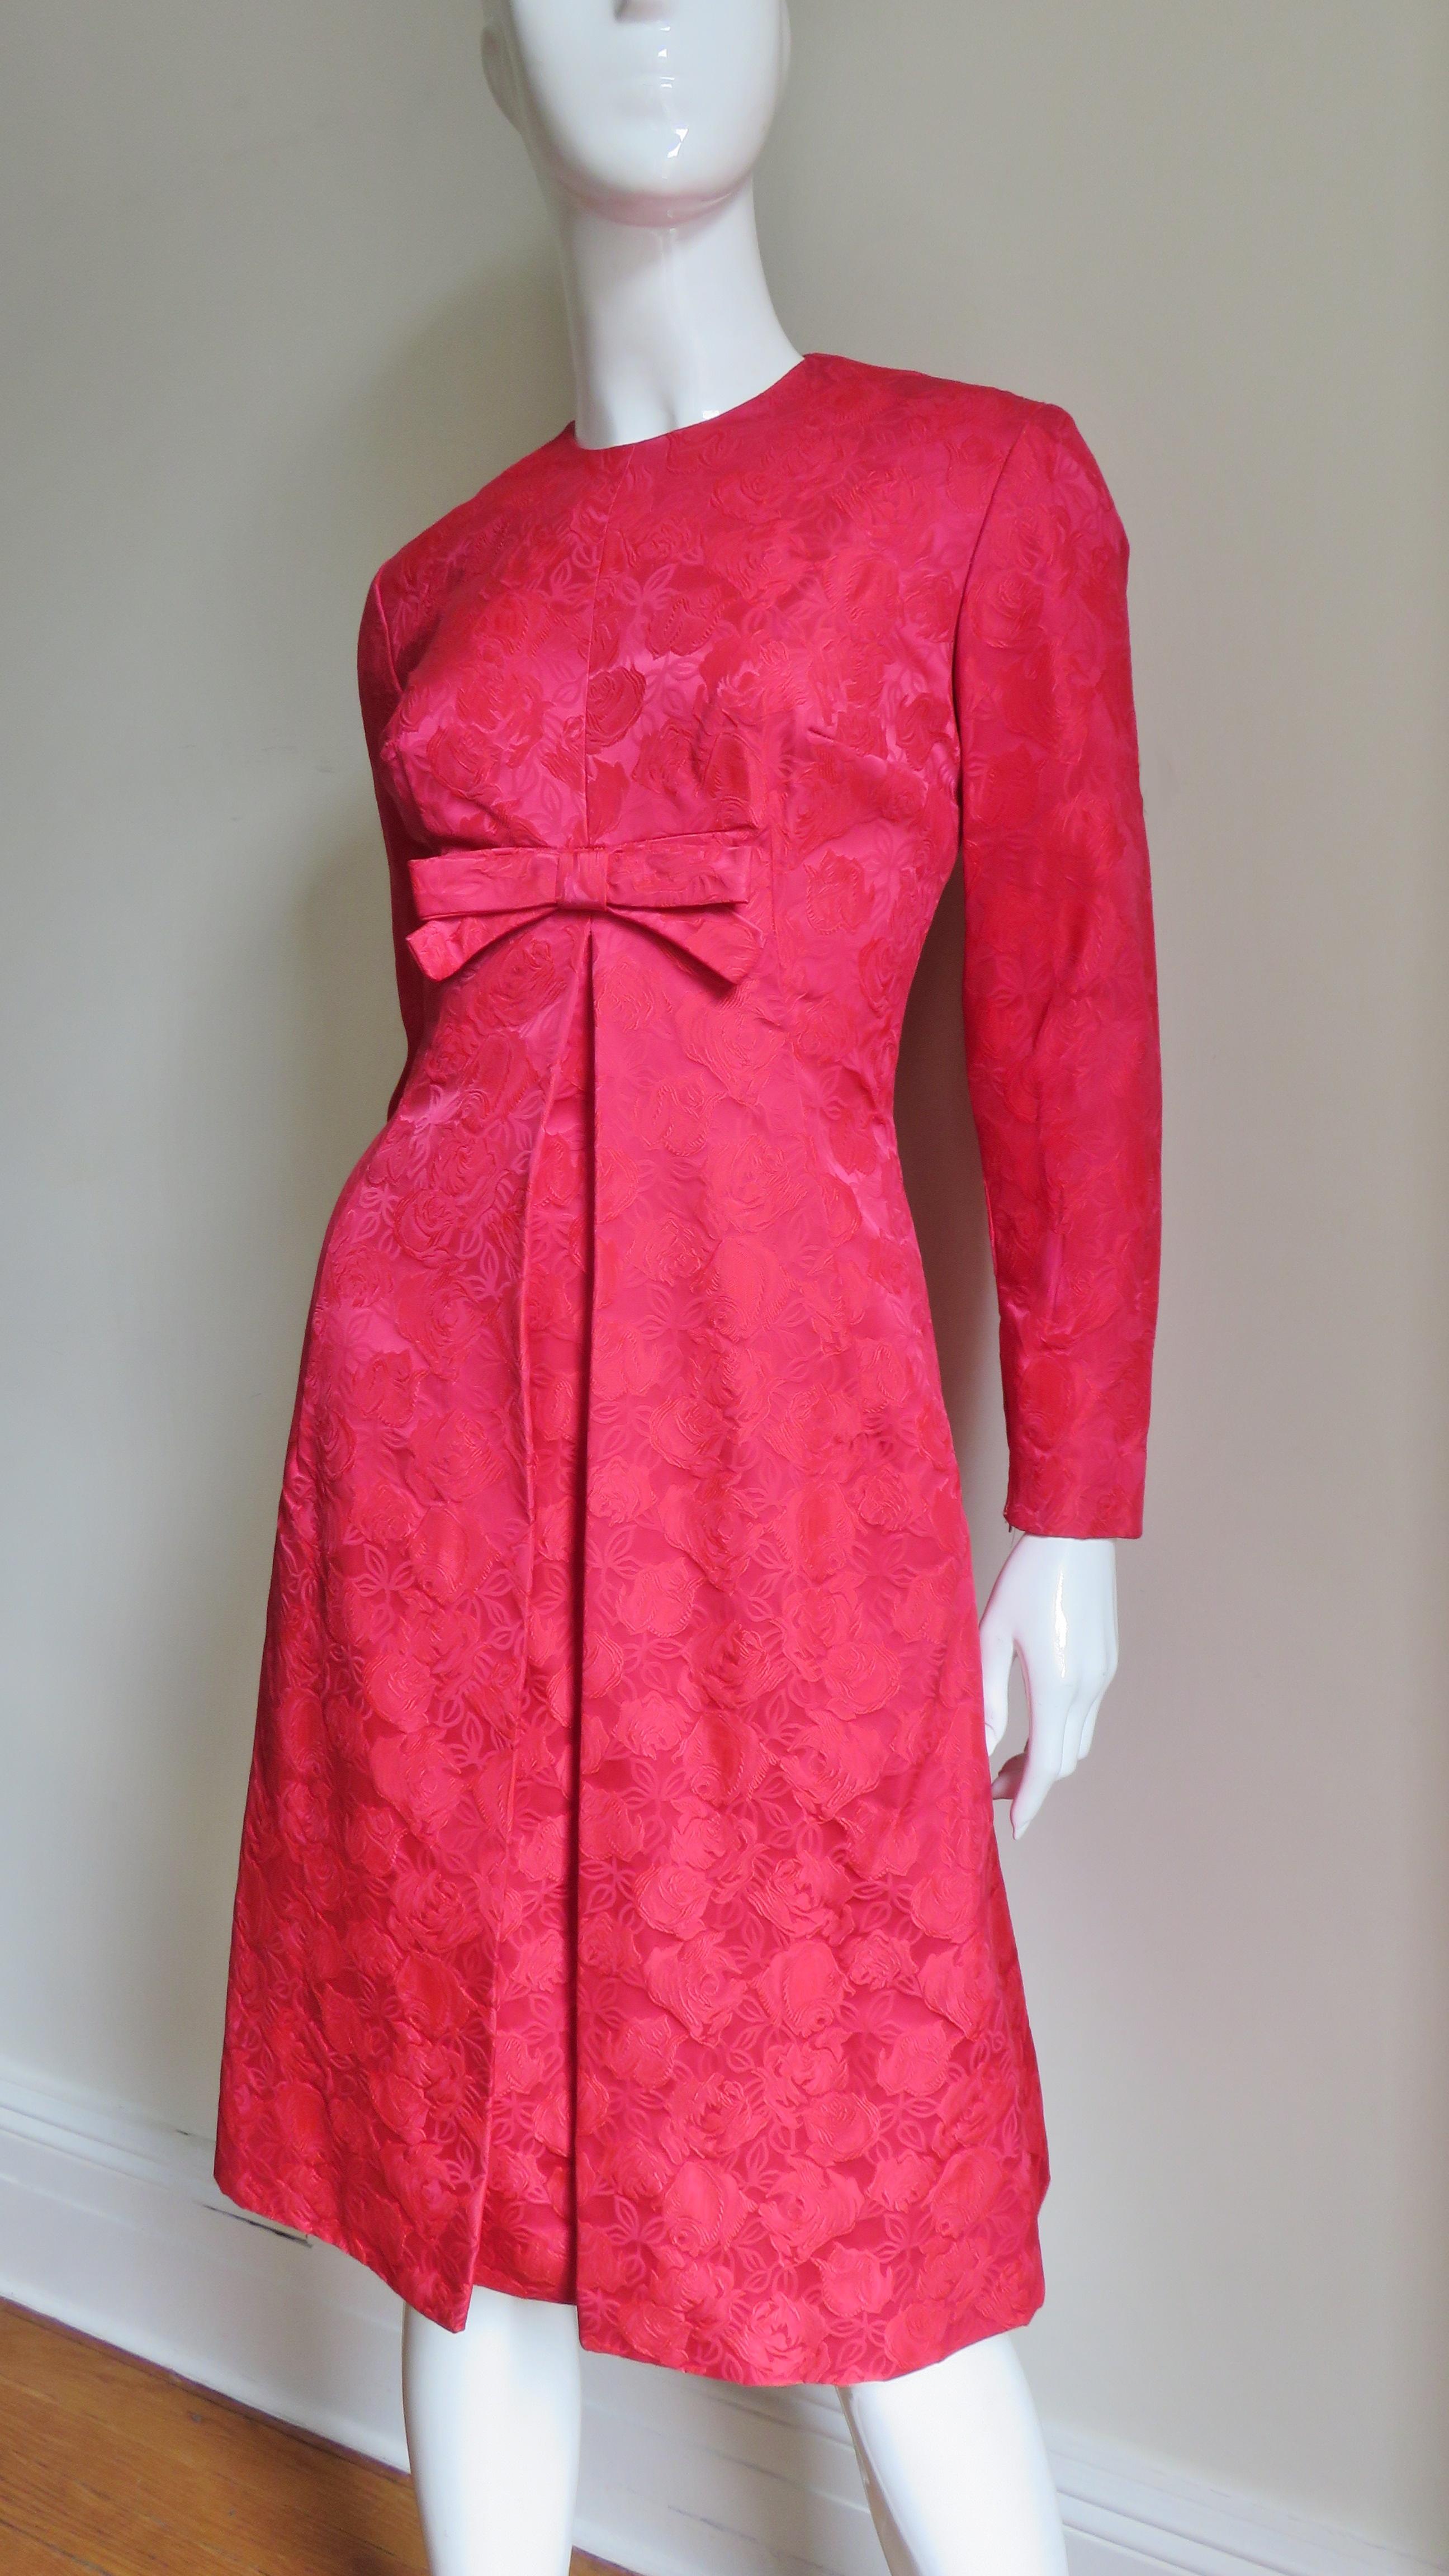 Suzy Perette New Damask Dress and Overdress 1950s 5